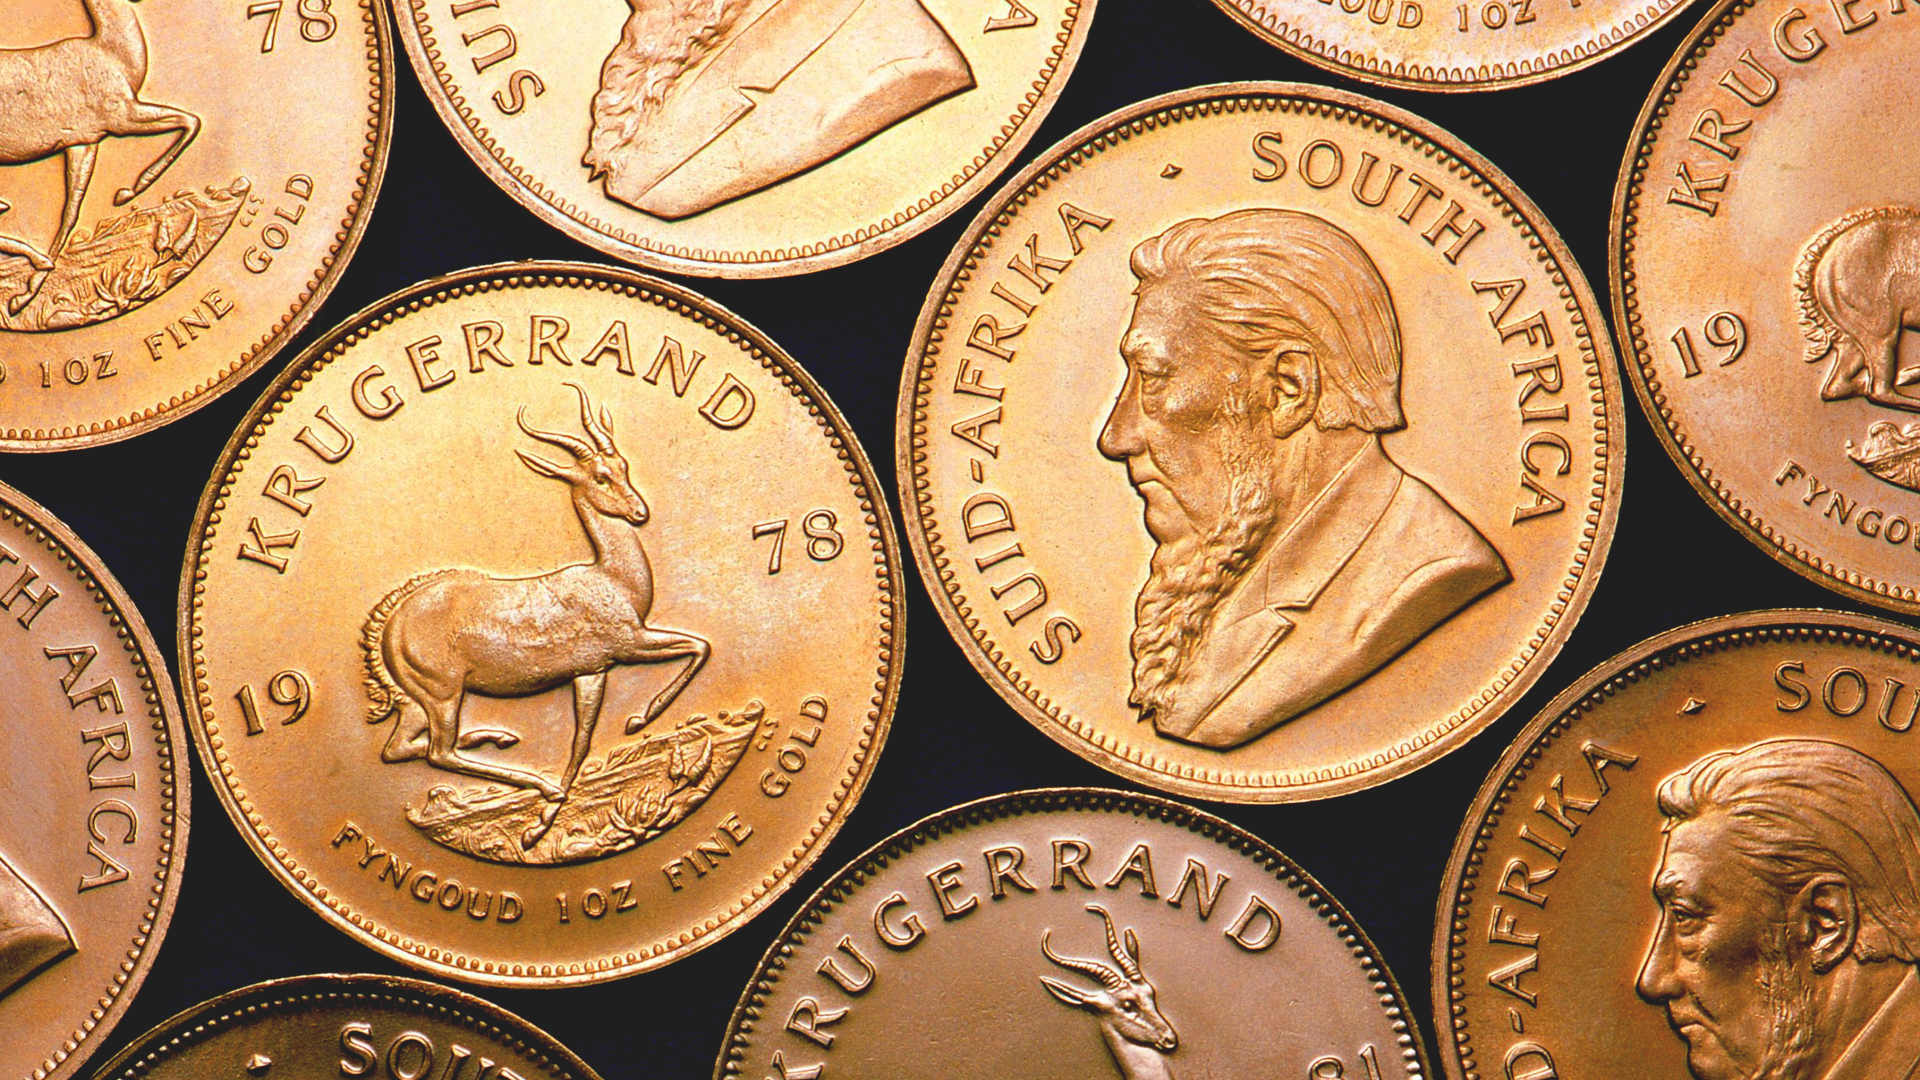 Zimbabwe resorts to gold coins amid high inflation